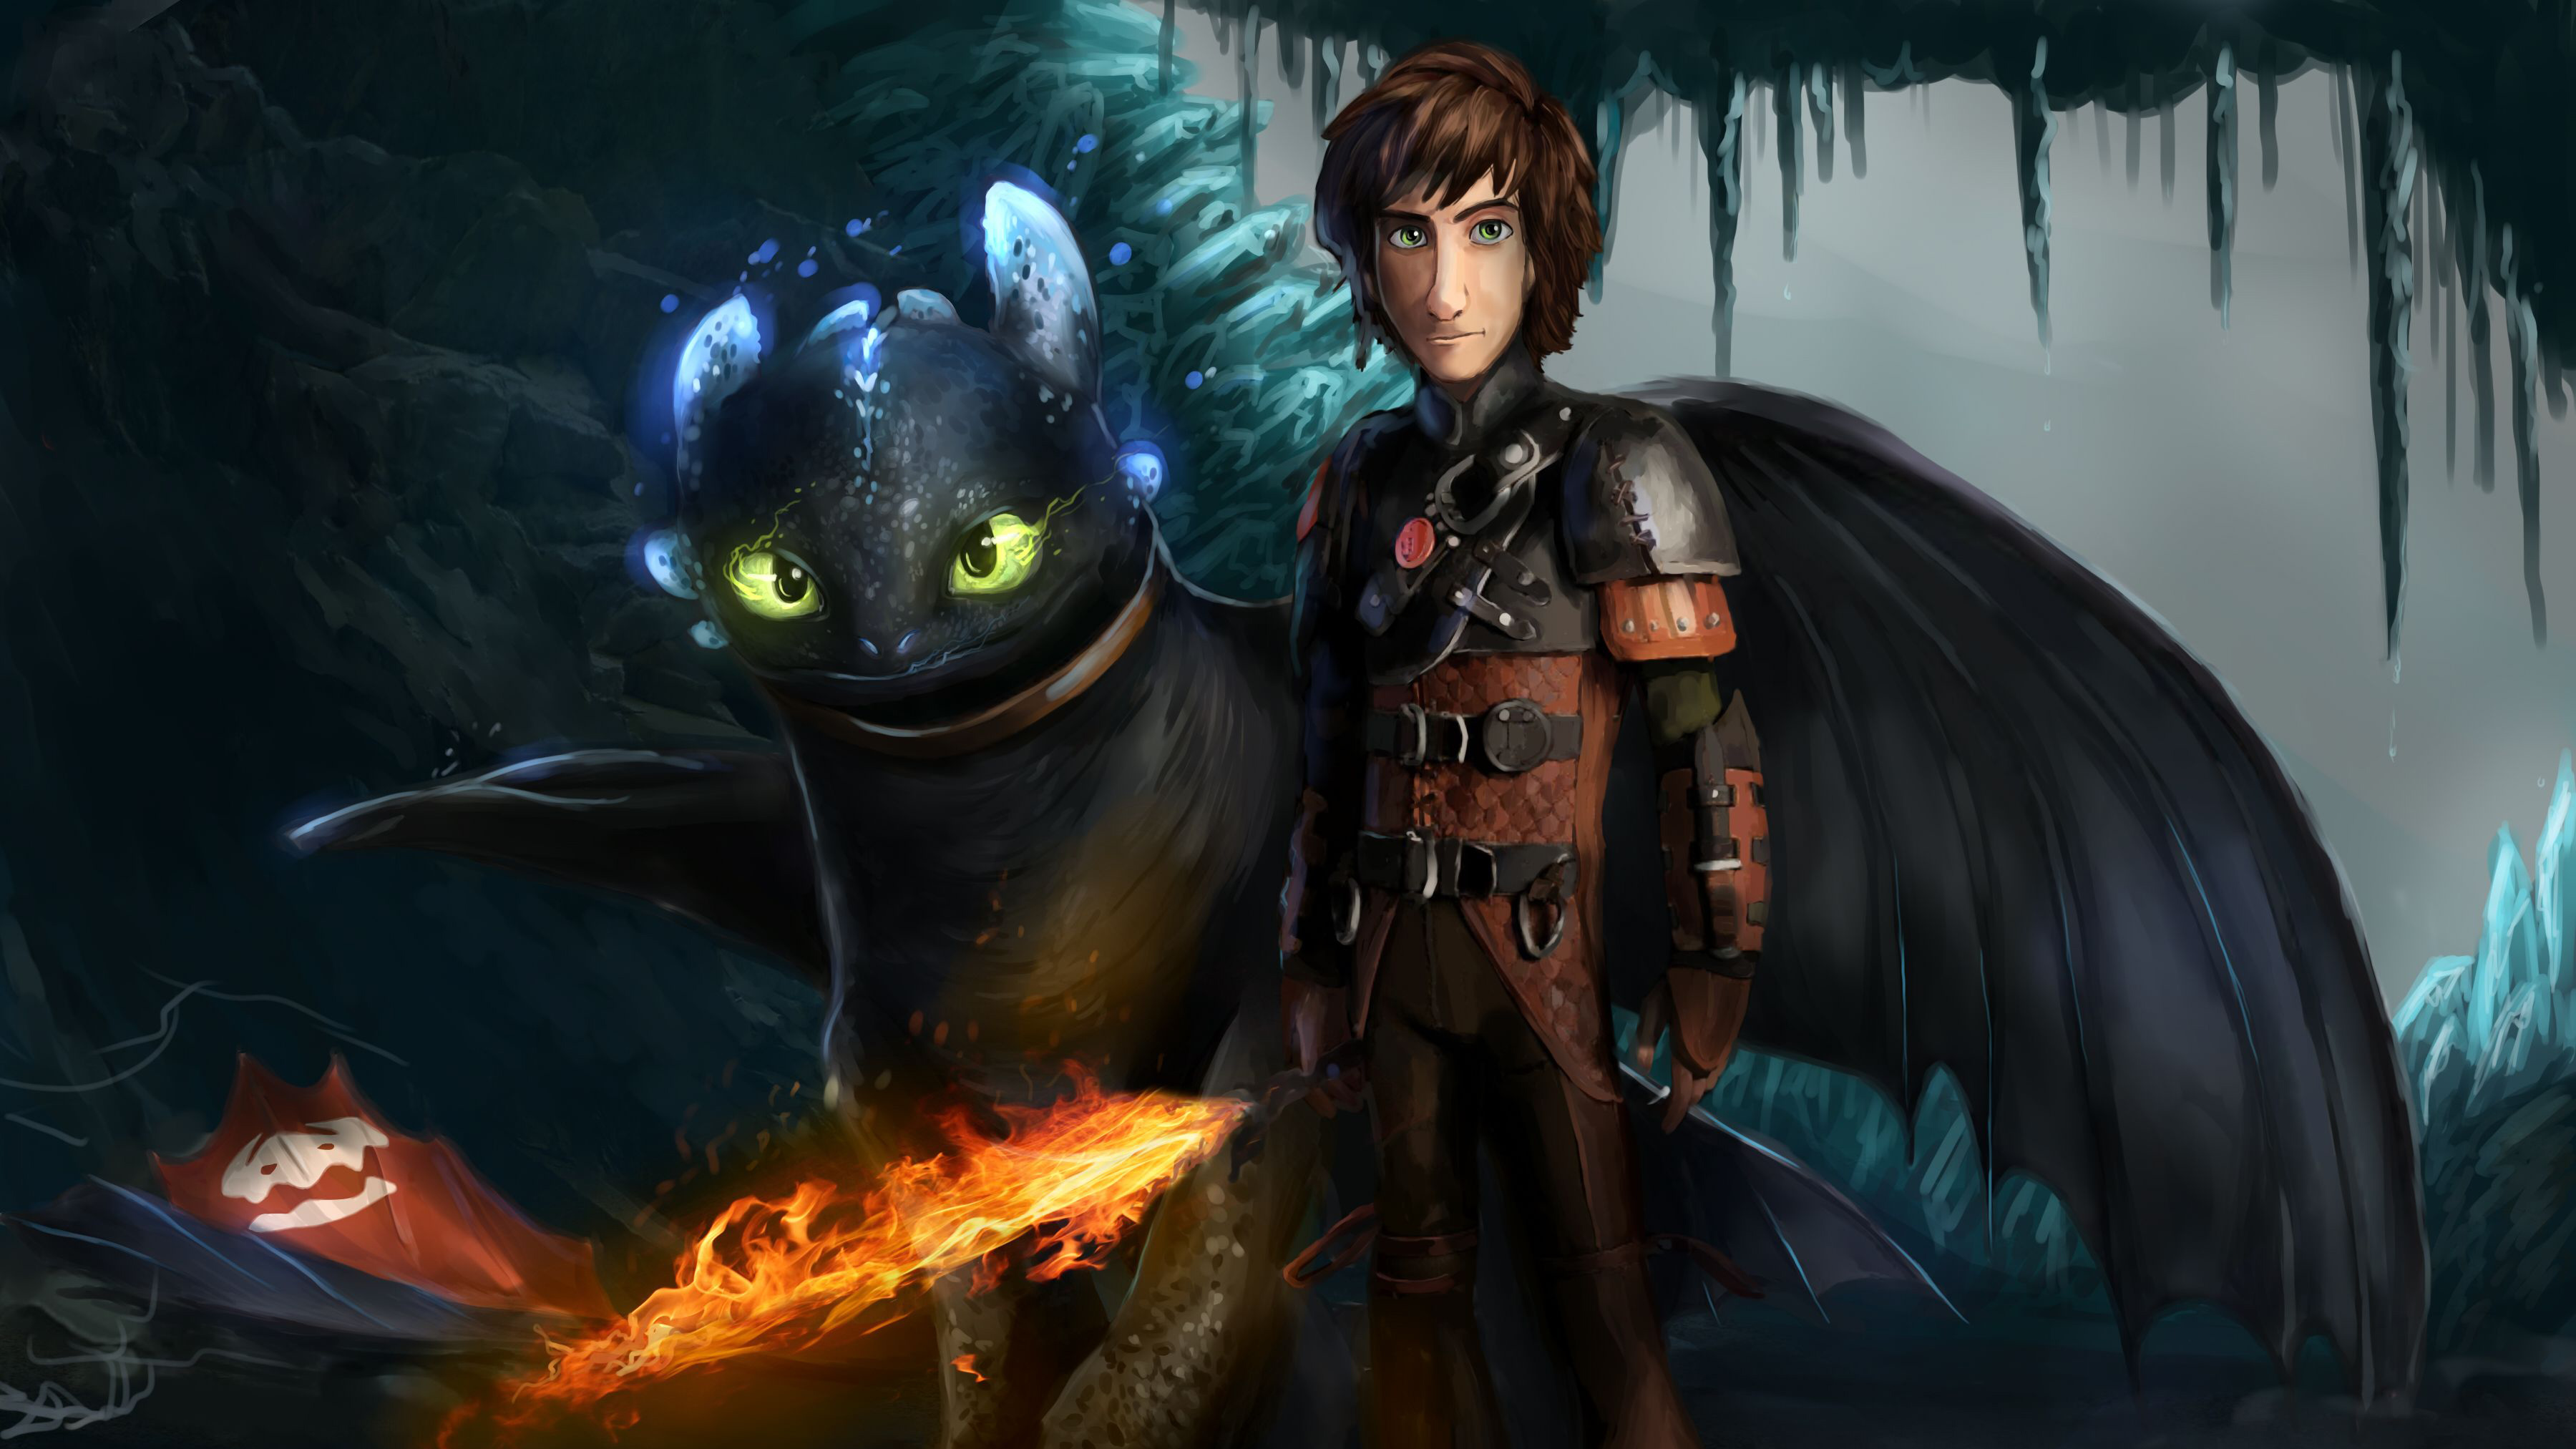 Hiccup (How to Train Your Dragon), Toothless (How to Train Your Dragon), How to Train Your Dragon: The Hidden World wallpaper HD Wallpaper